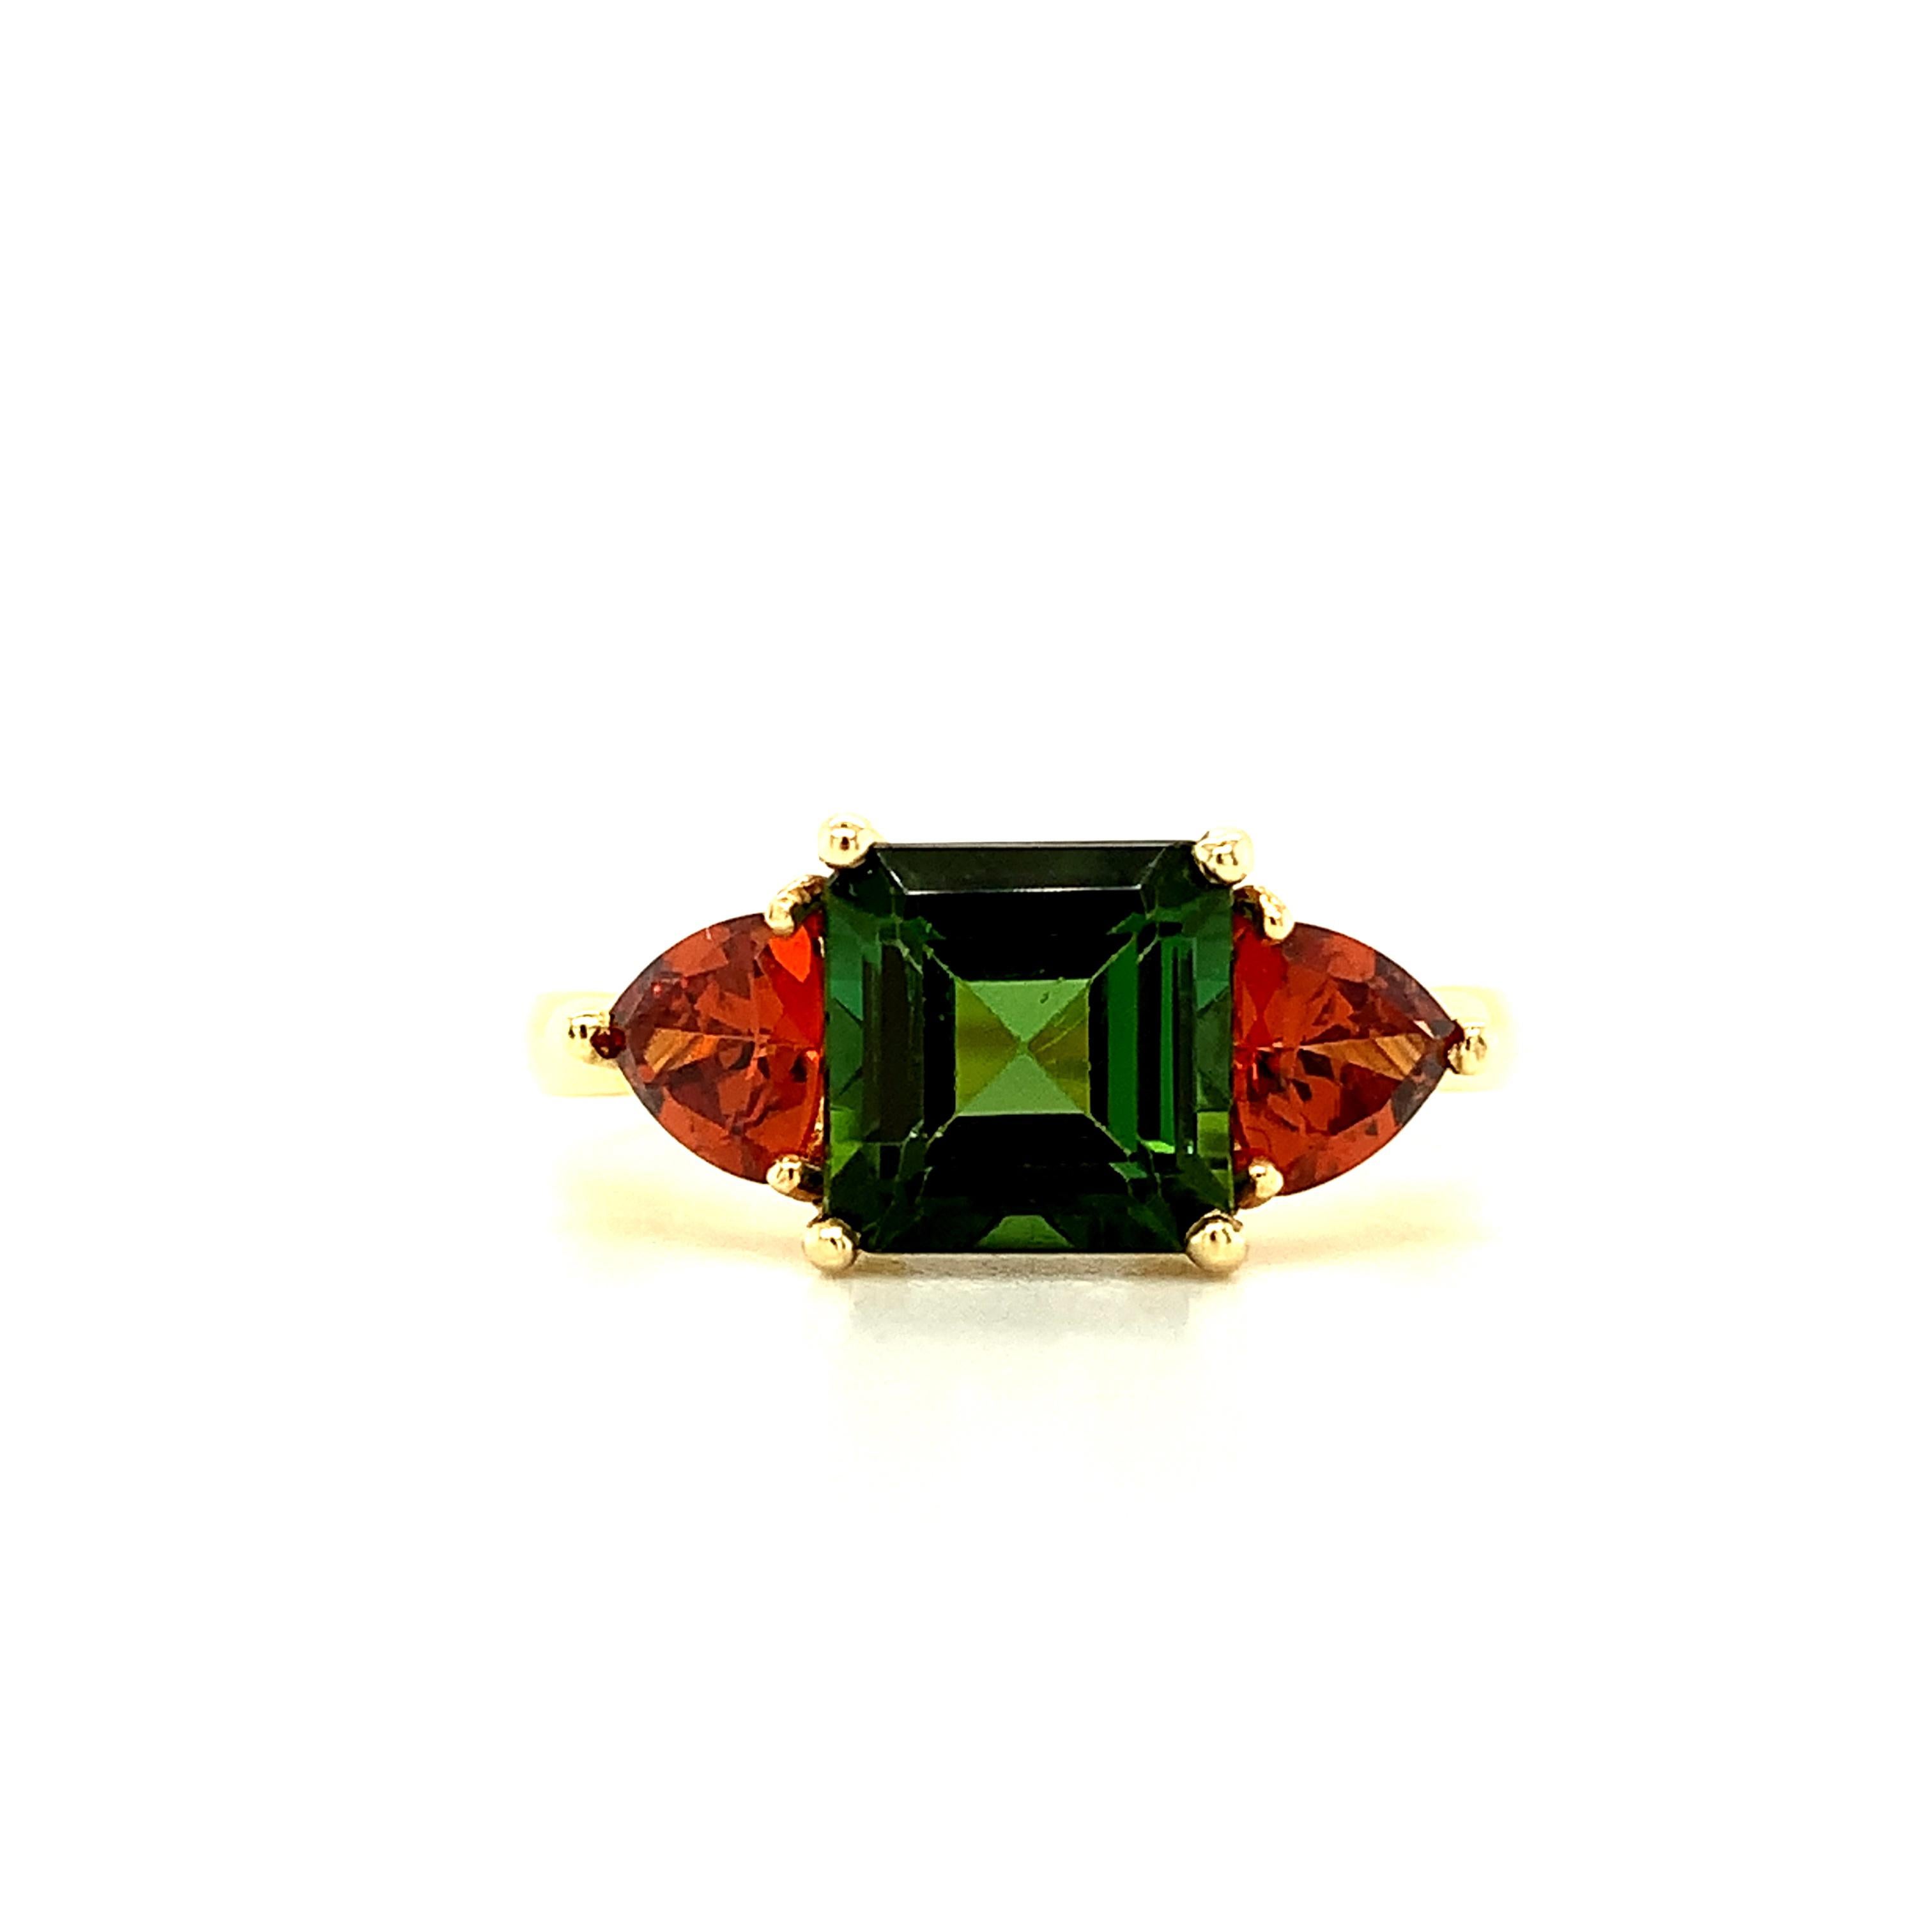 This pretty ring features a rich green tourmaline and orange garnets in a fresh, nature-inspired color combination! The 2.22 carat center tourmaline is emerald-cut and a vibrant shade of luscious pine green. Sparkling orange spessartite garnet